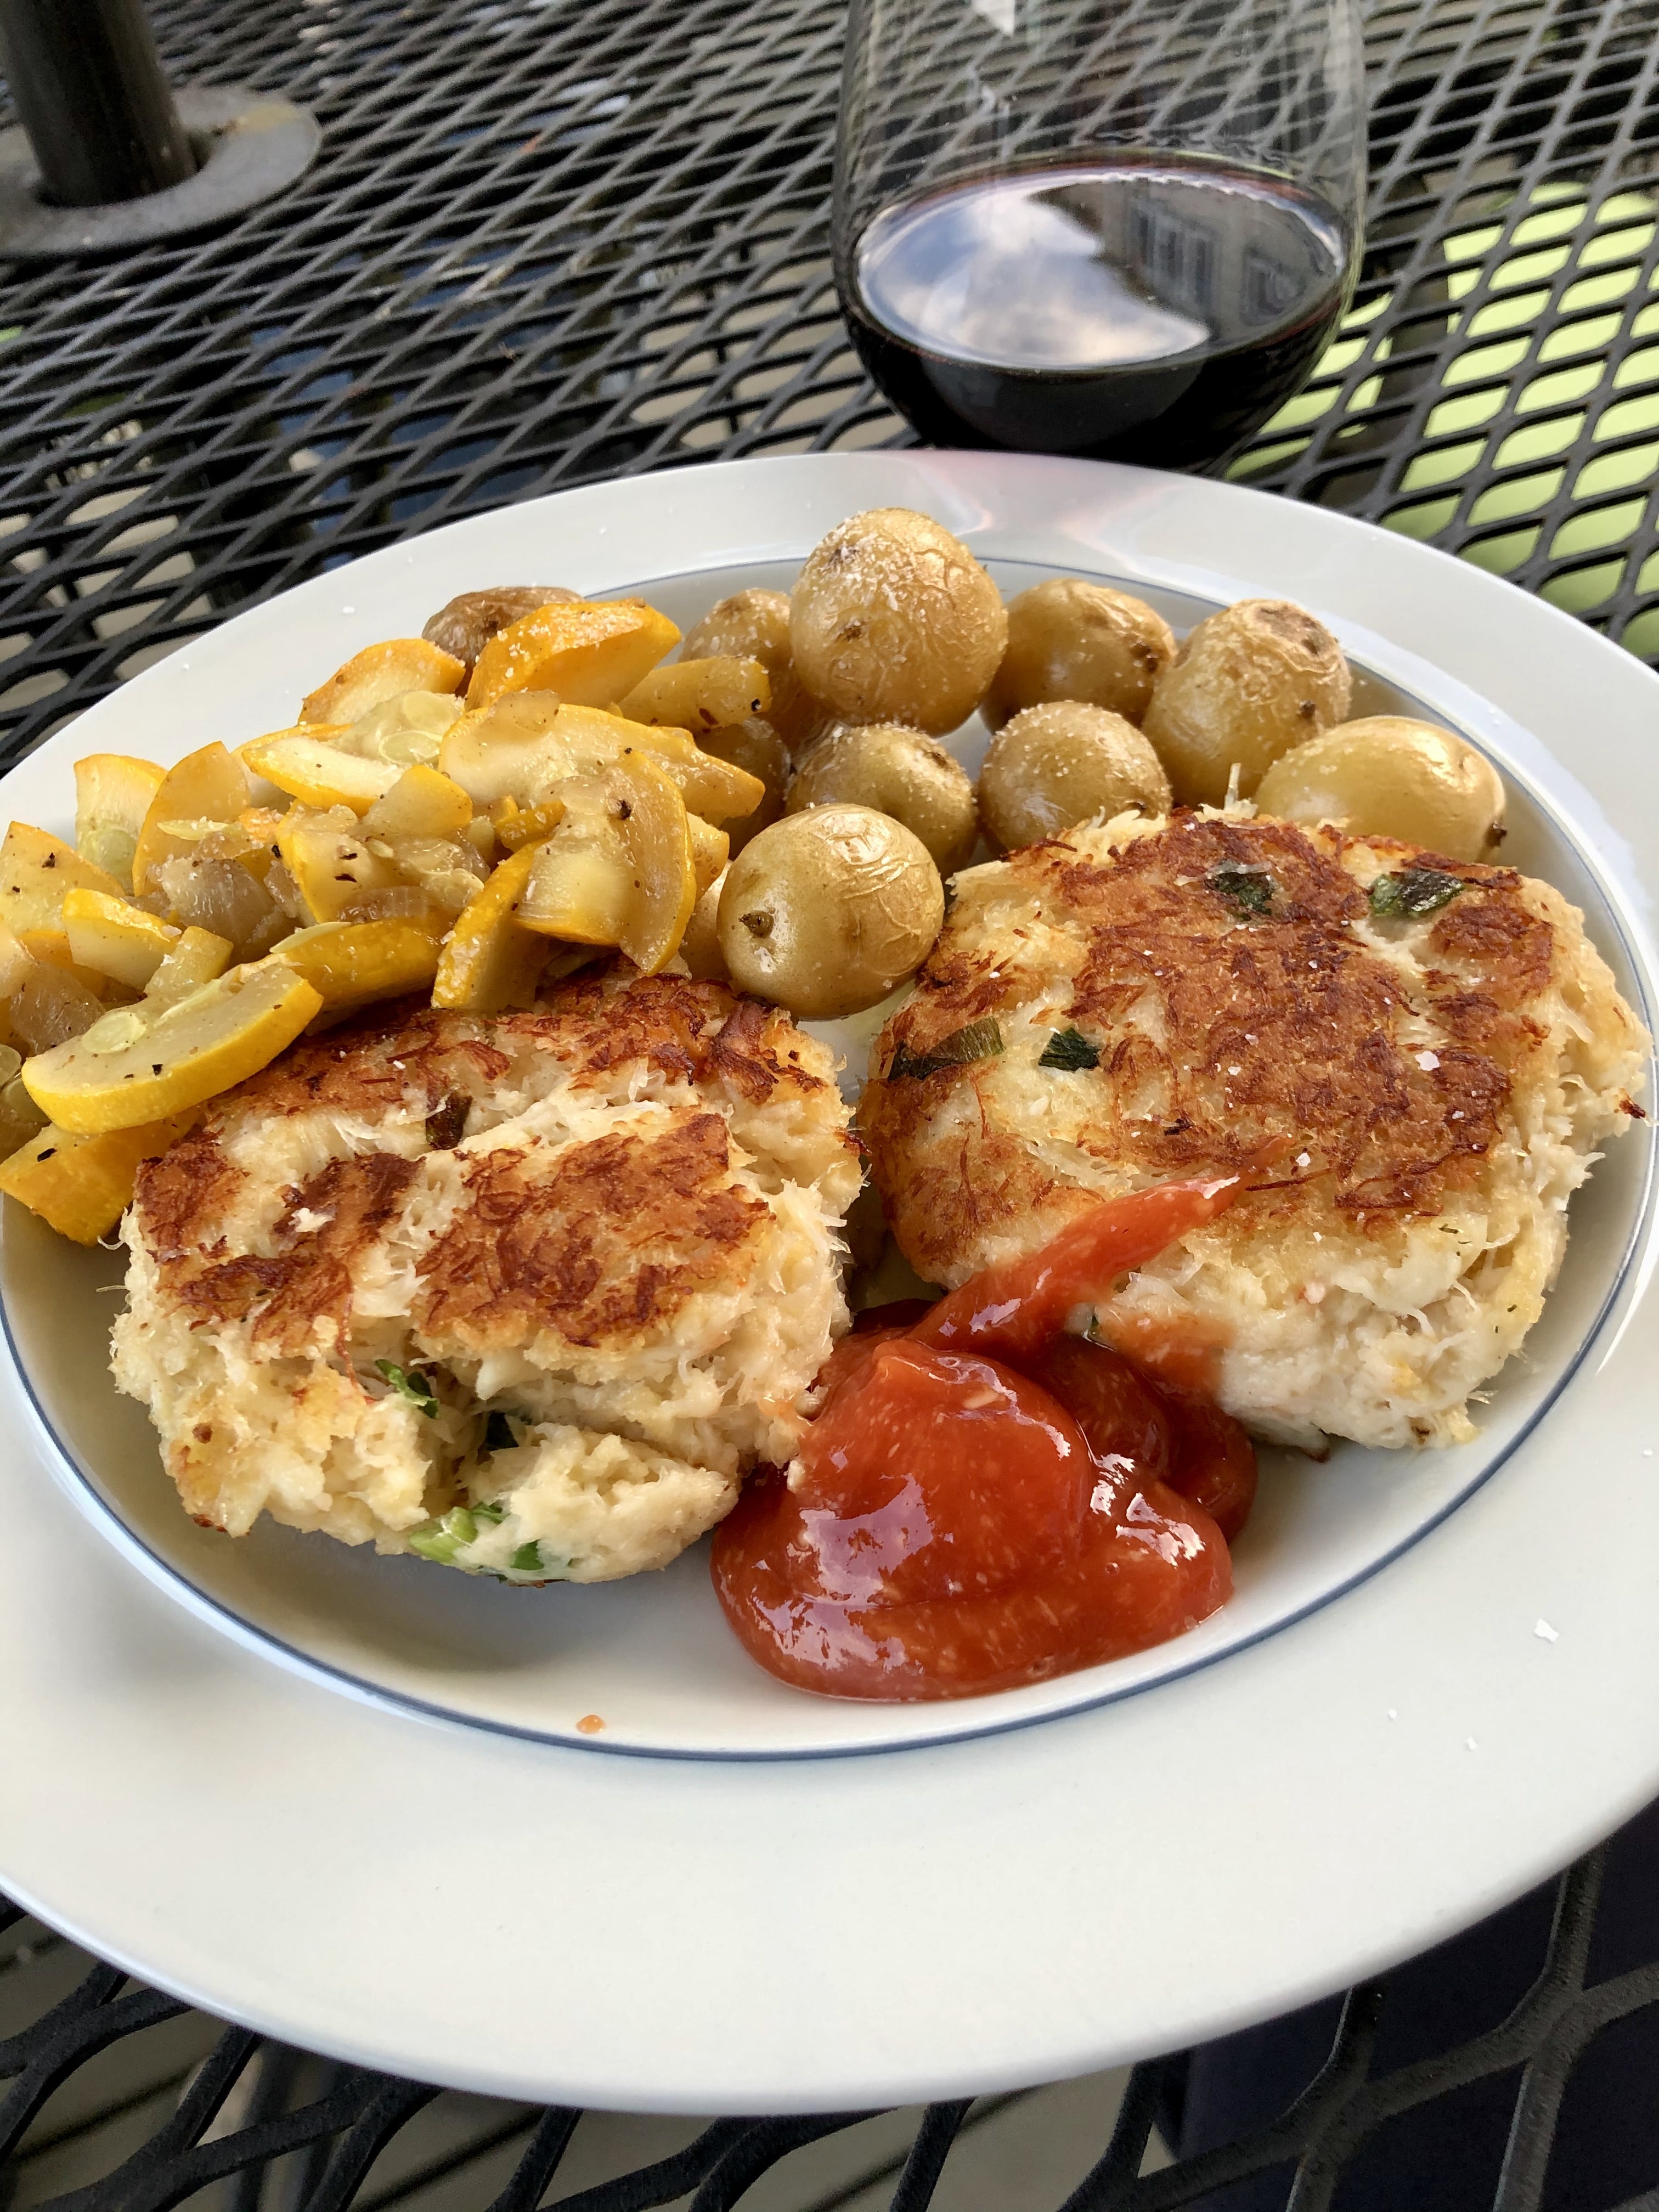 Dungeness Crab Cakes, Fried Zucchini and Potatoes